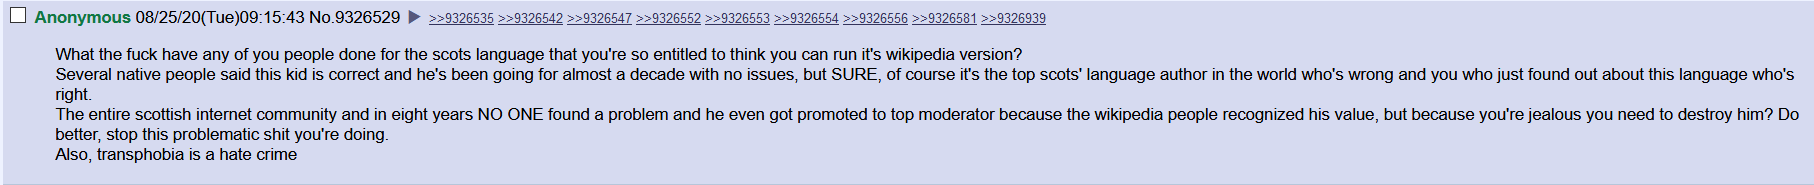 wikipedia scots AG 4chan self defense.png